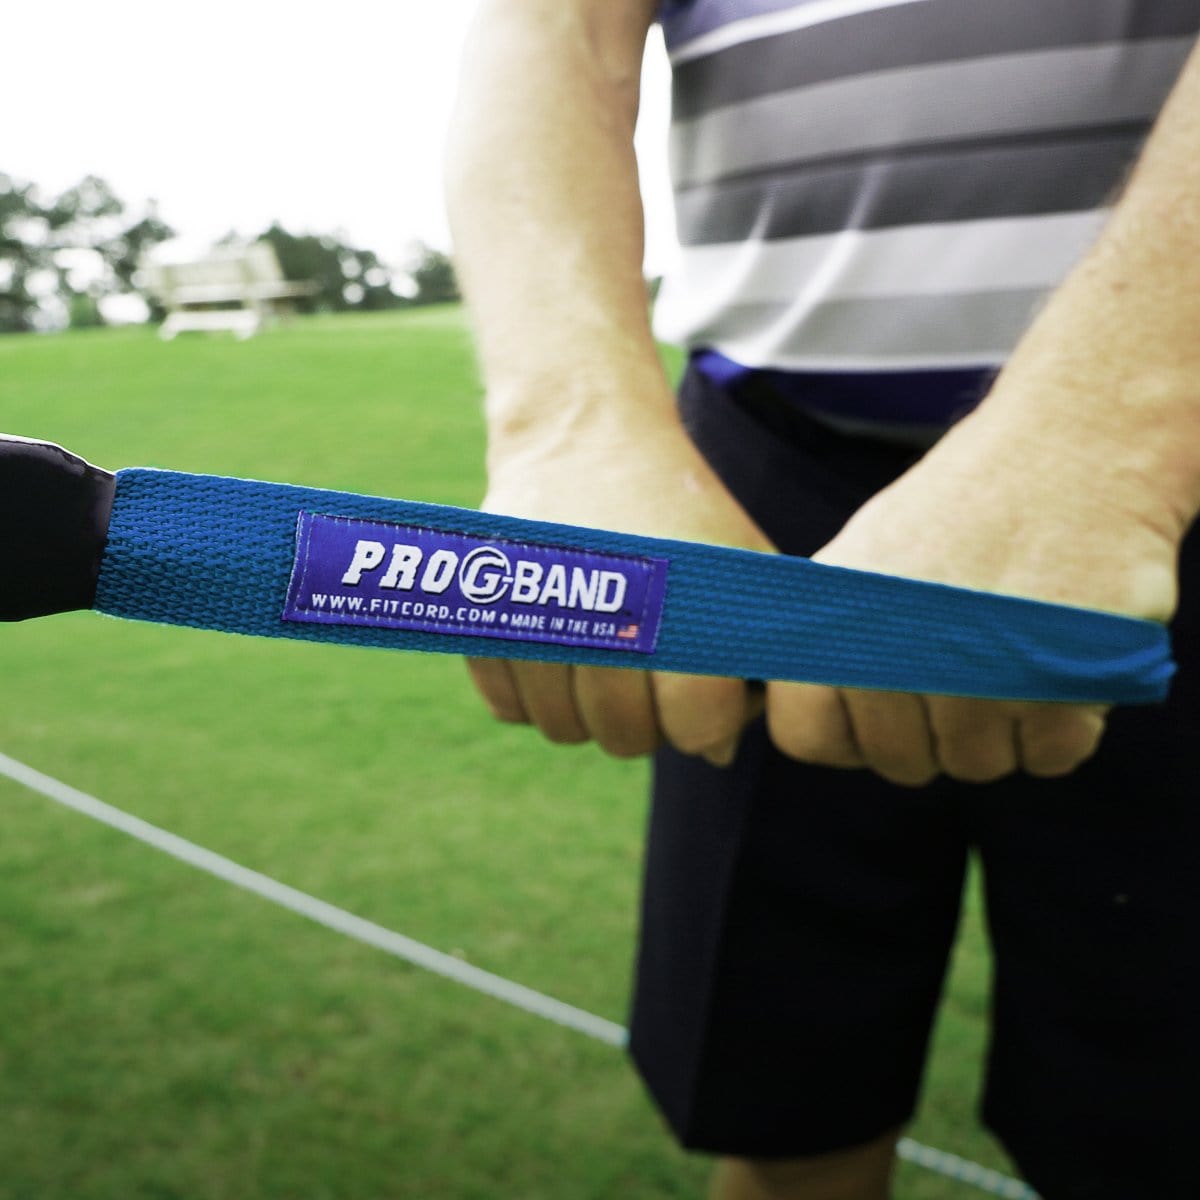 Pre game golf stretch band, increase power in golf swing, golf swing practice band, golf cart attachment